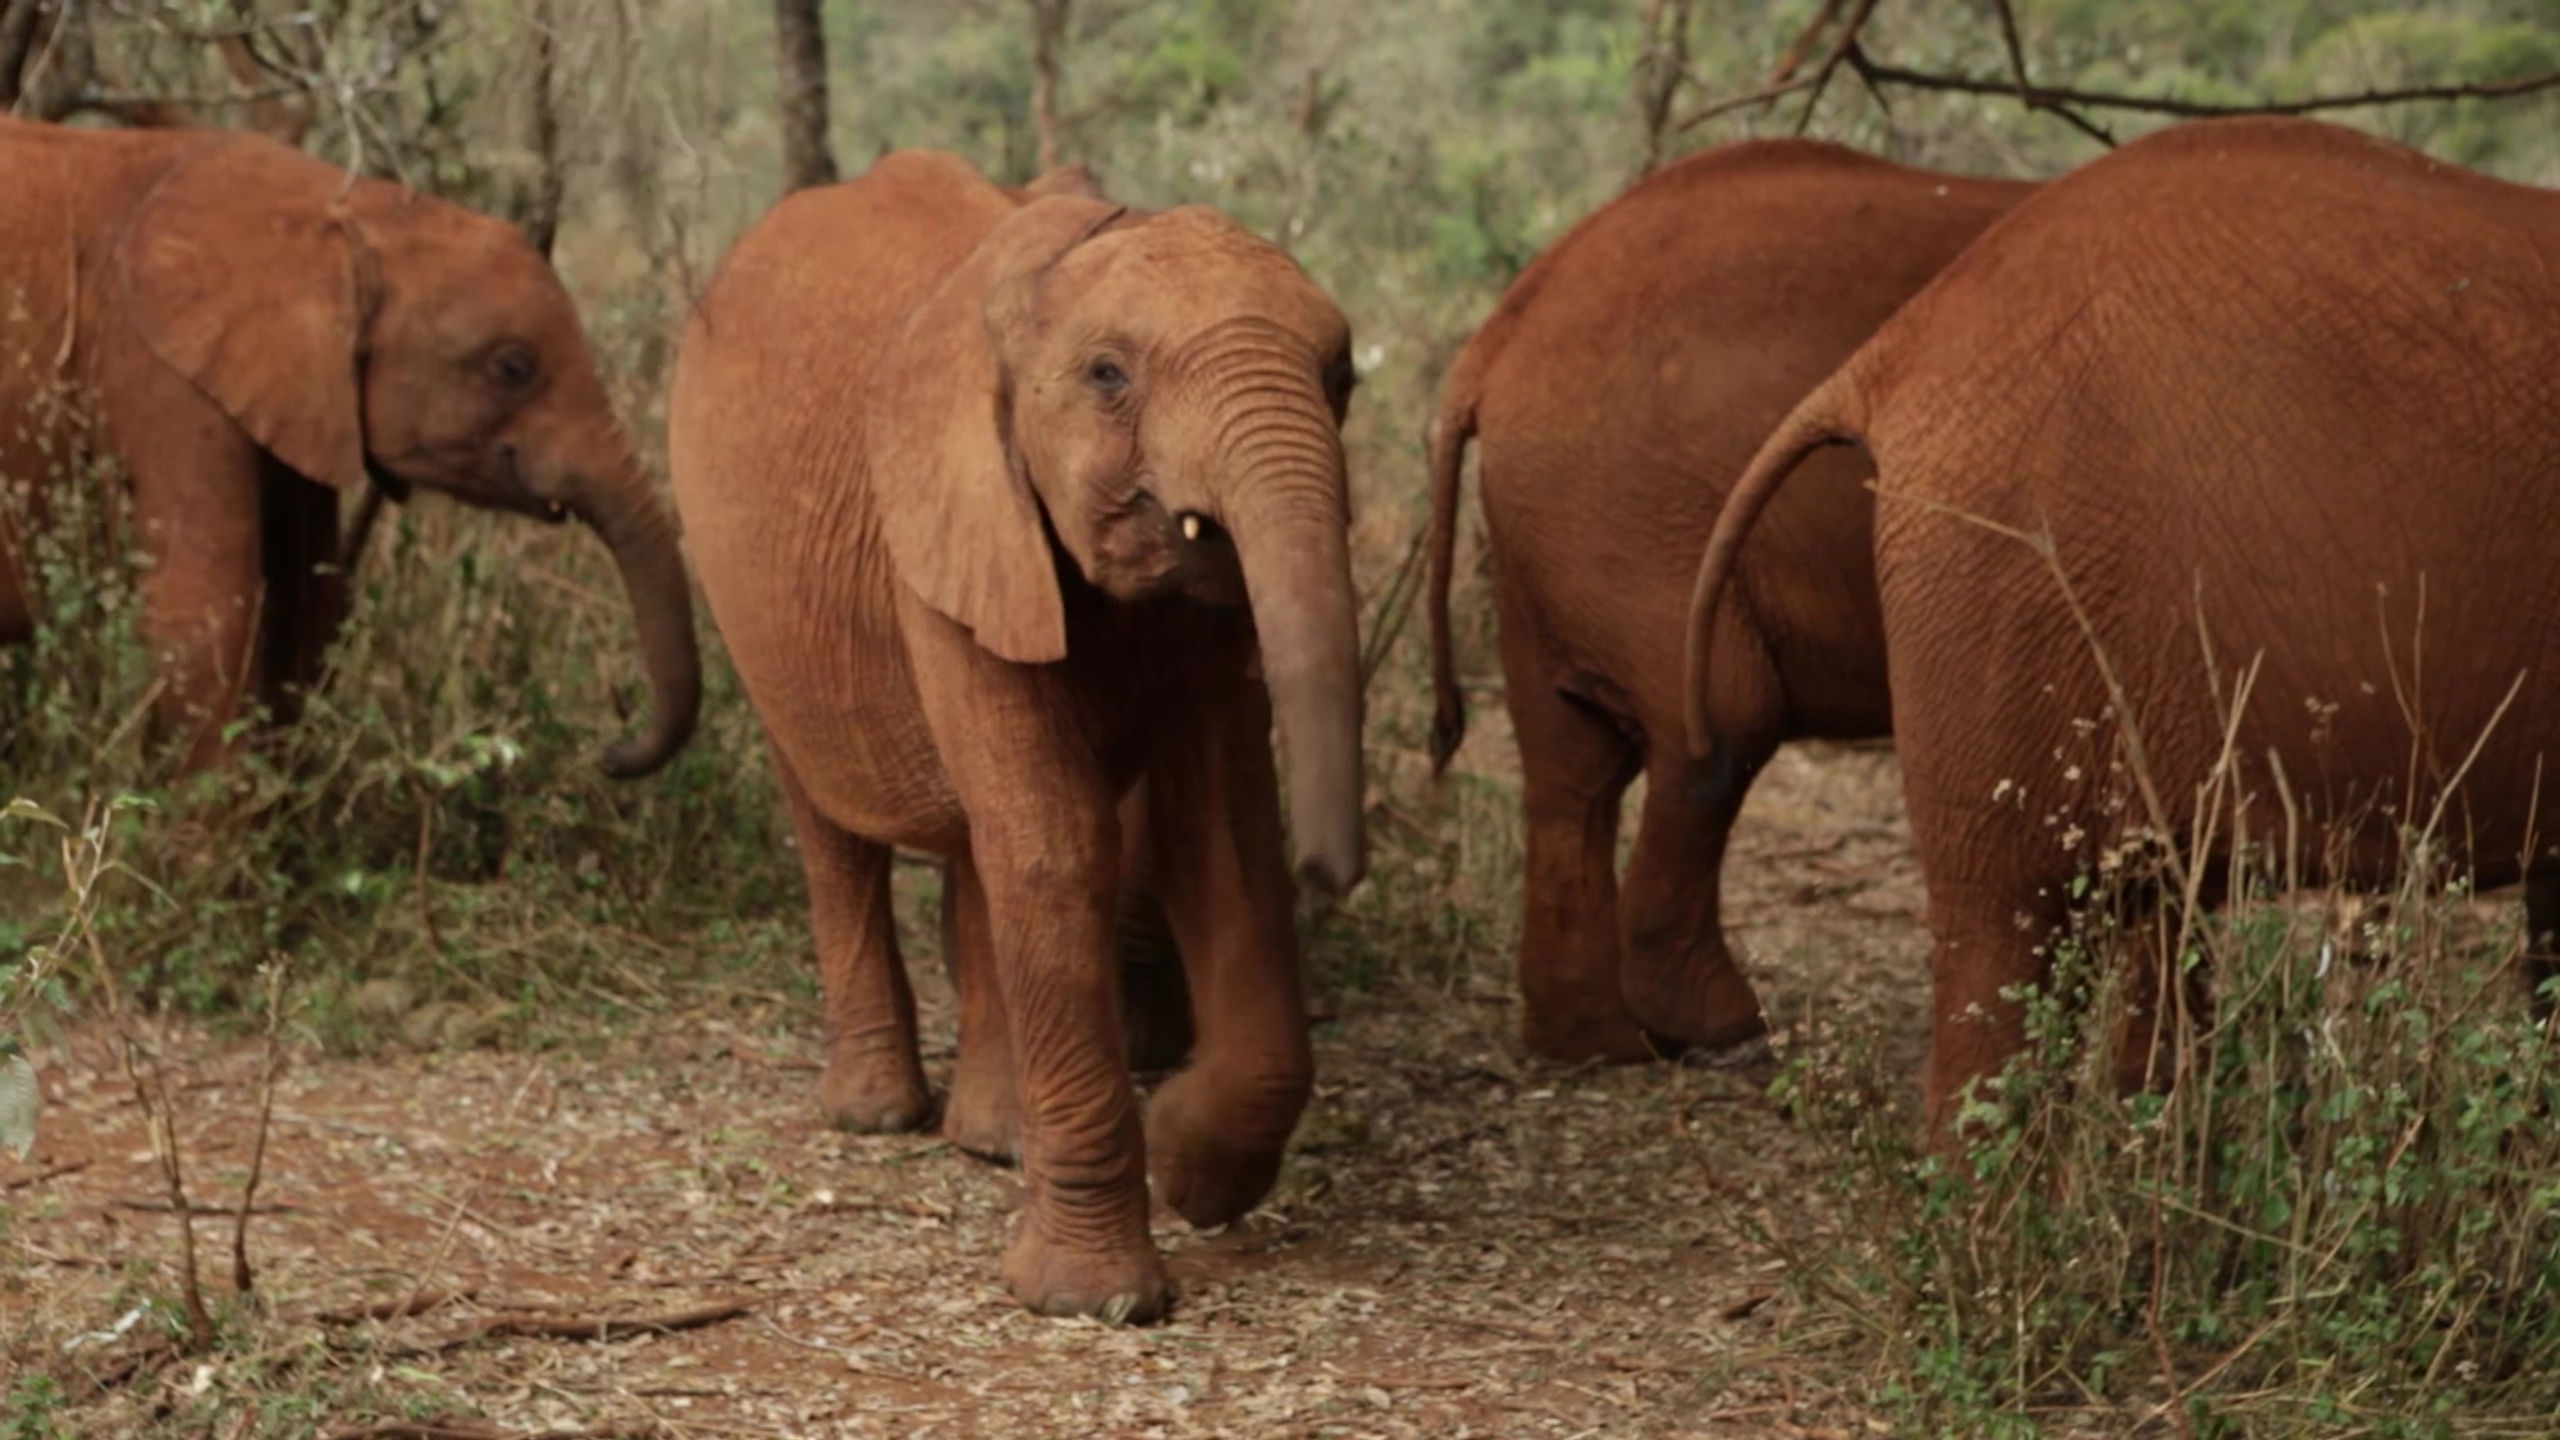 EPI- Africa’s vision to save its elephants